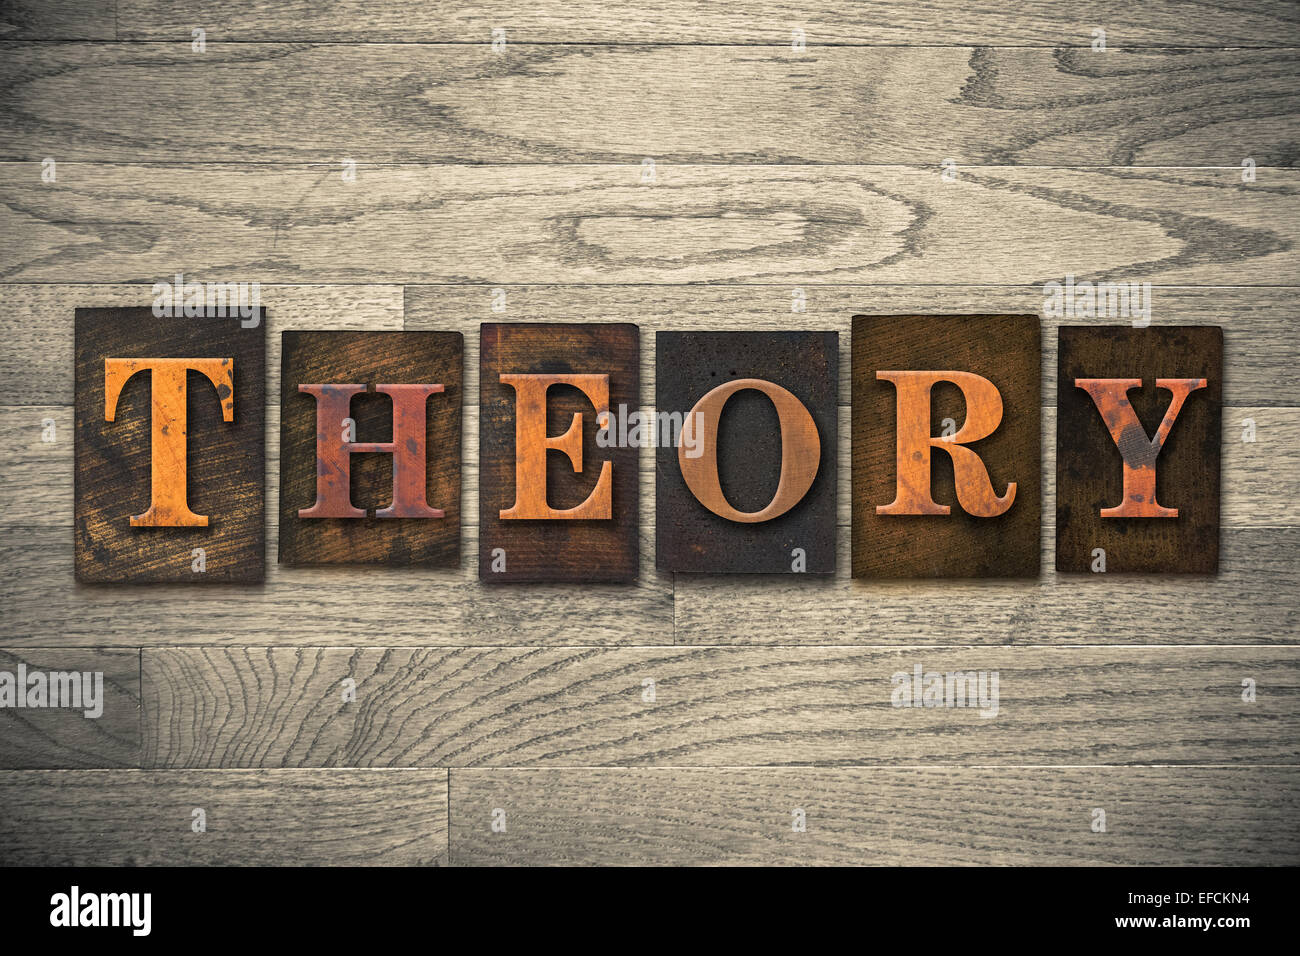 The word 'THEORY' written in vintage wooden letterpress type. Stock Photo